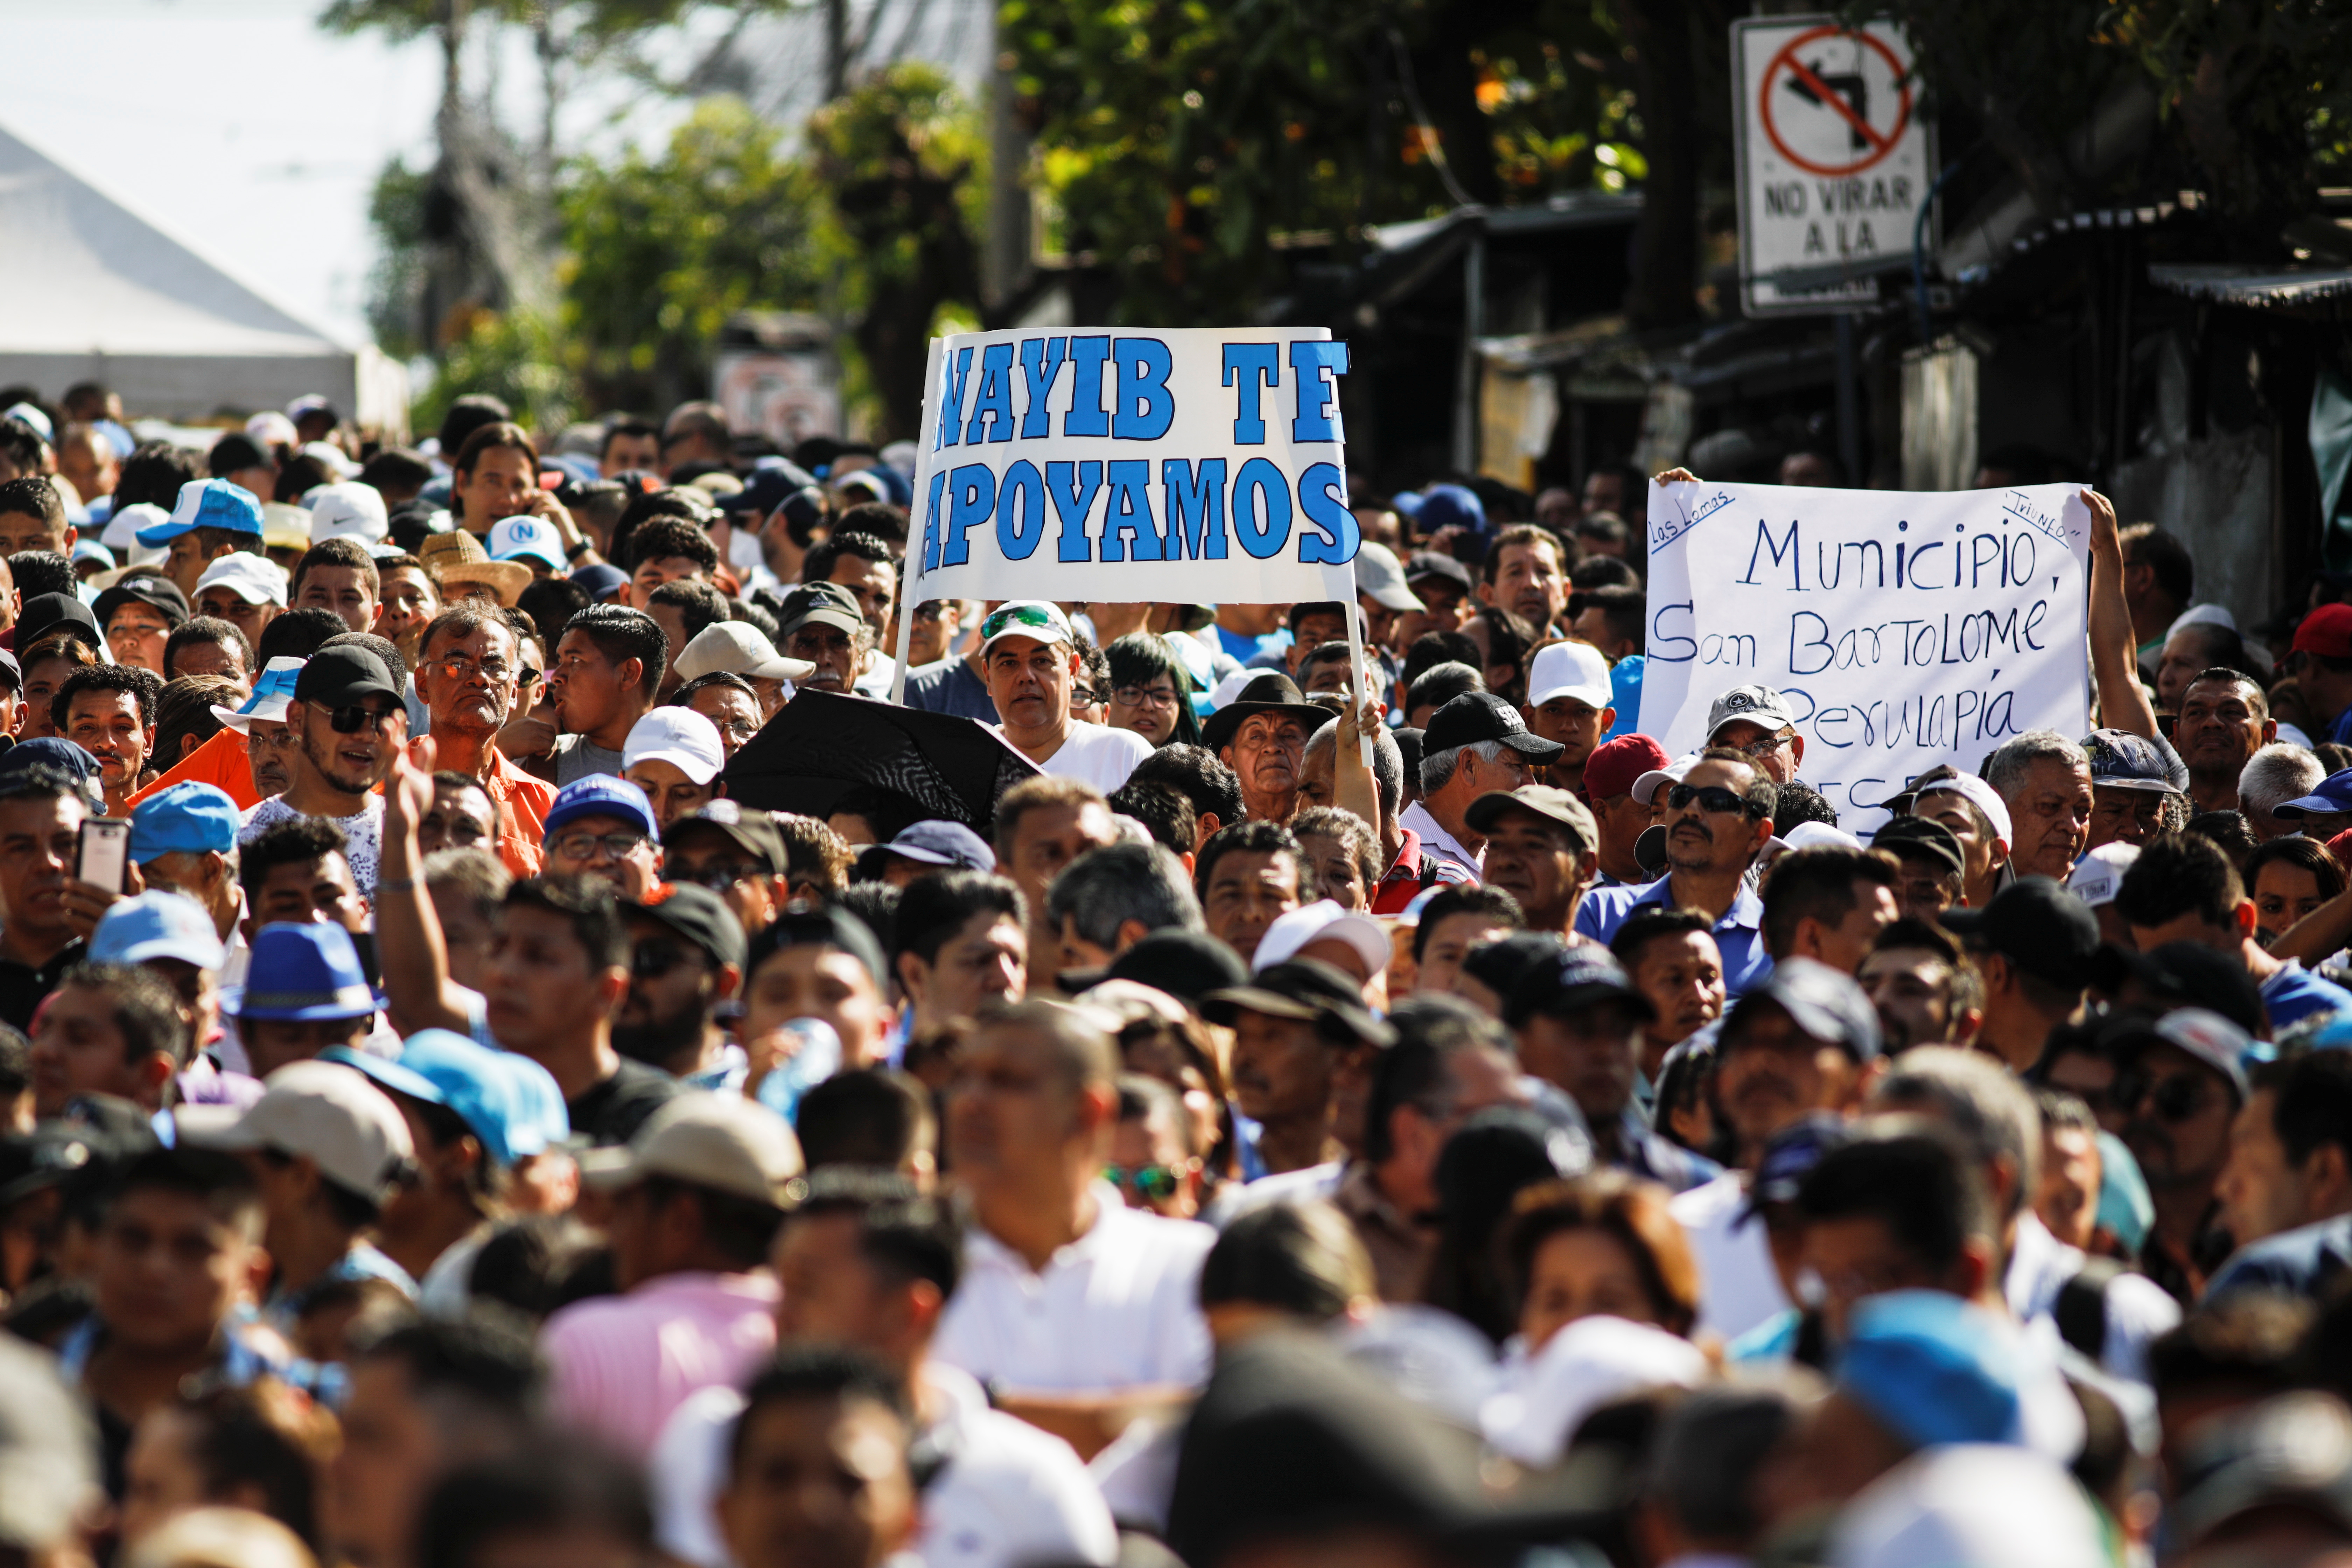 Supporters of Salvadoran President Nayib Bukele protest outside the national congress in San Salvador to push for the approval of funds for a government security plan Feb. 9. (CNS/Reuters/Jose Cabezas)